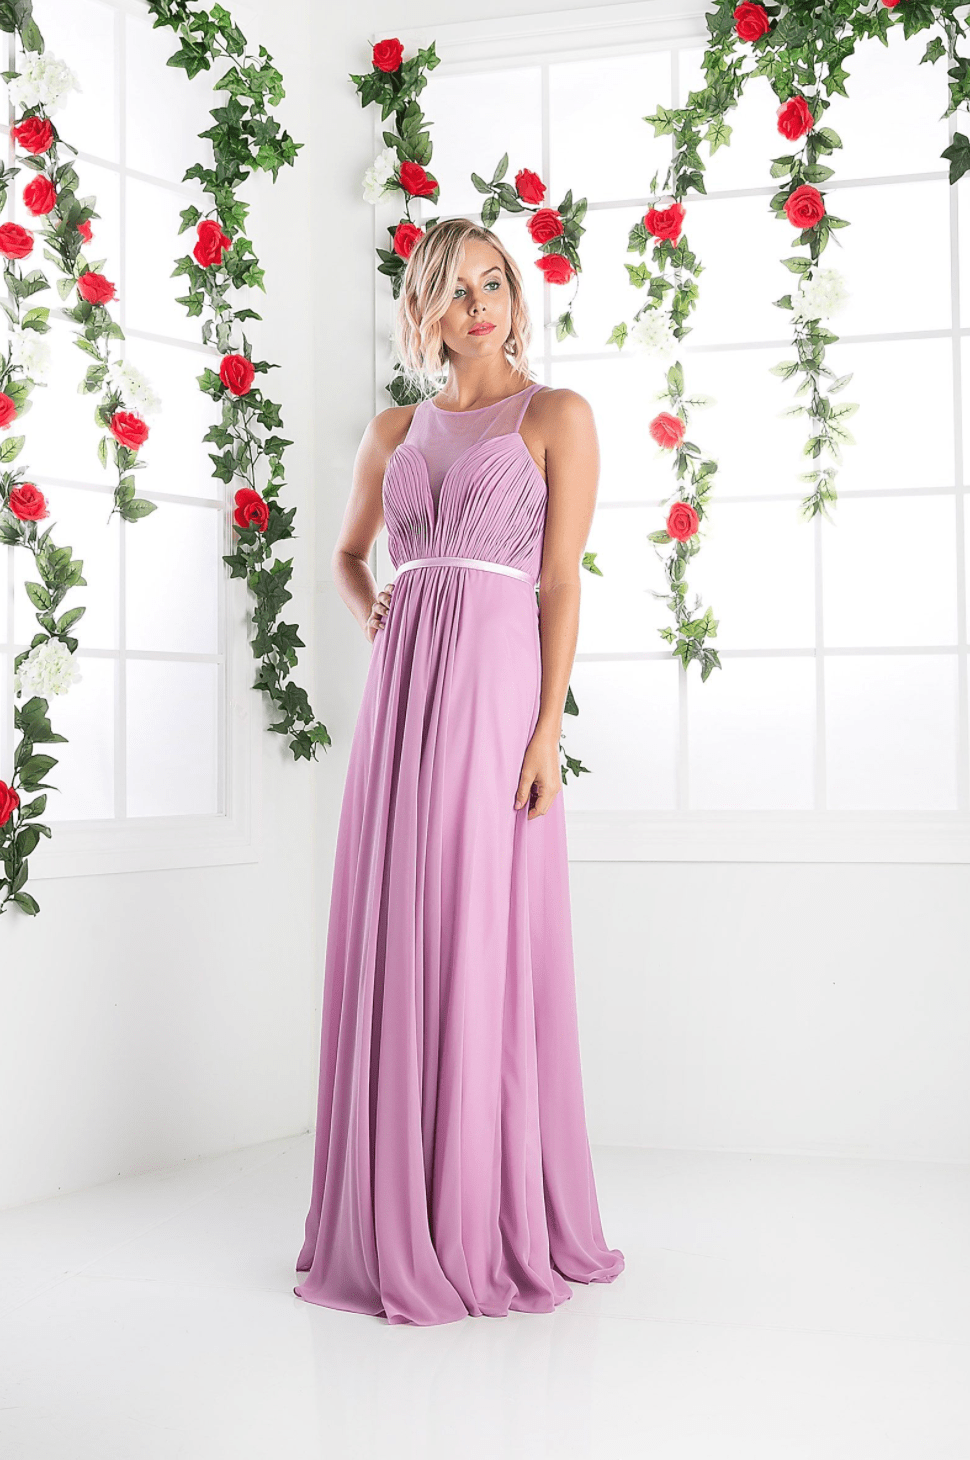 Pleated Chiffon & Sheer Dress By Cinderella Divine - NORMA REED